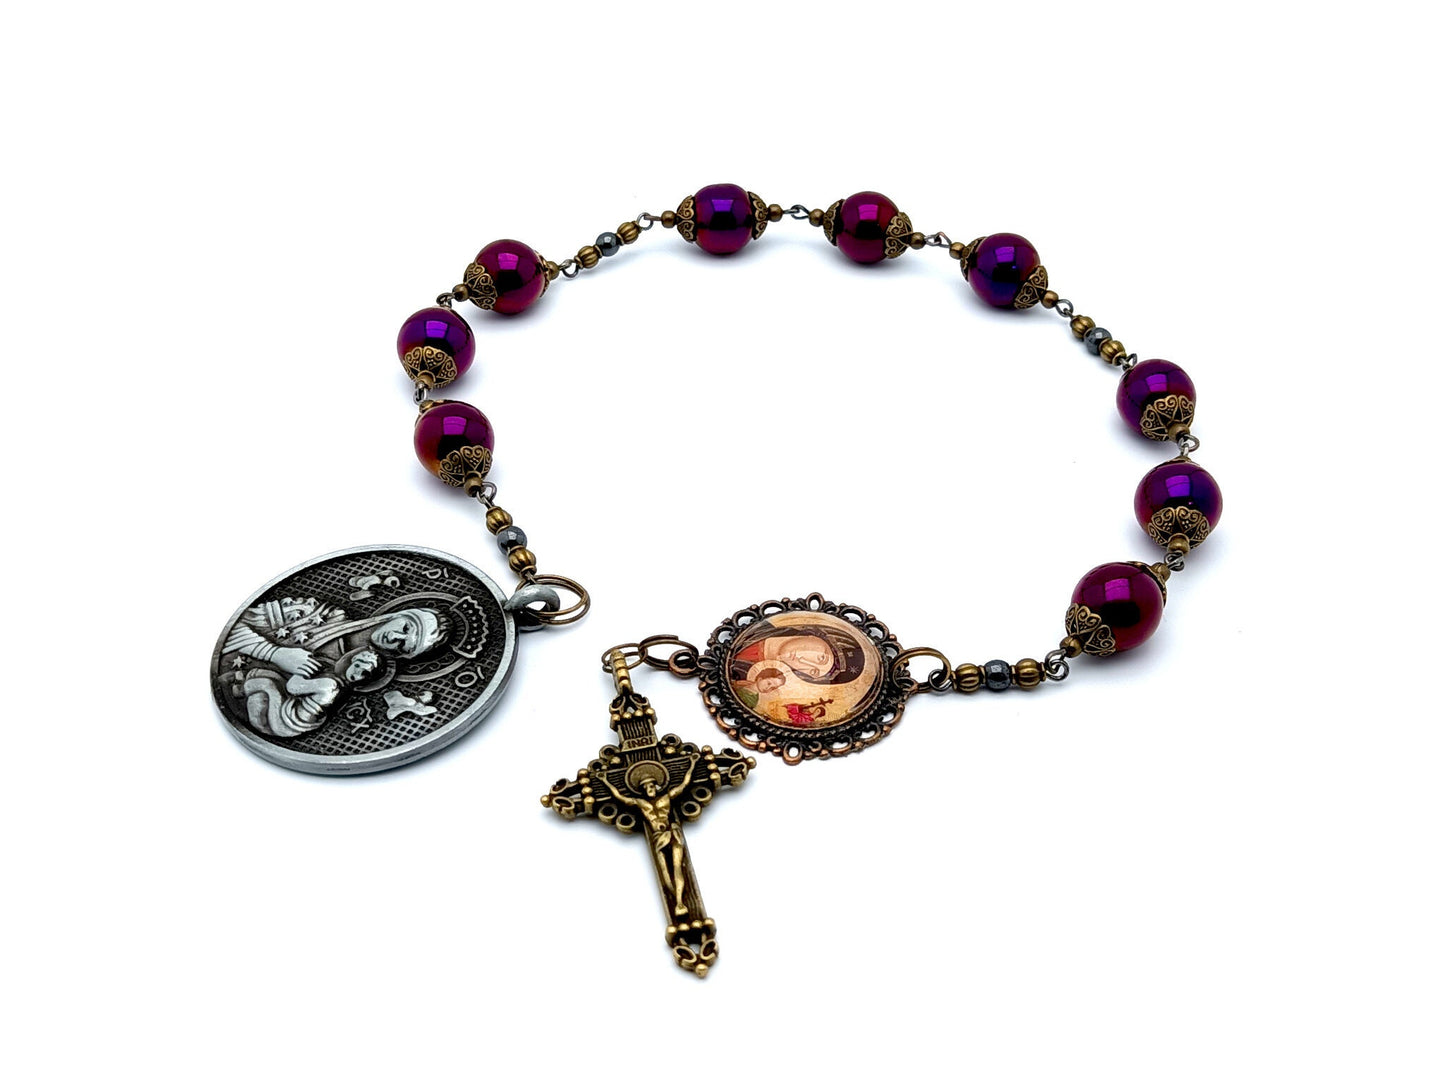 Our Lady of Perpetual Succour unique rosary beads prayer chaplet with purple and brass beads, Our Lady of Perpetual Help domed picture medals and brass crucifix.